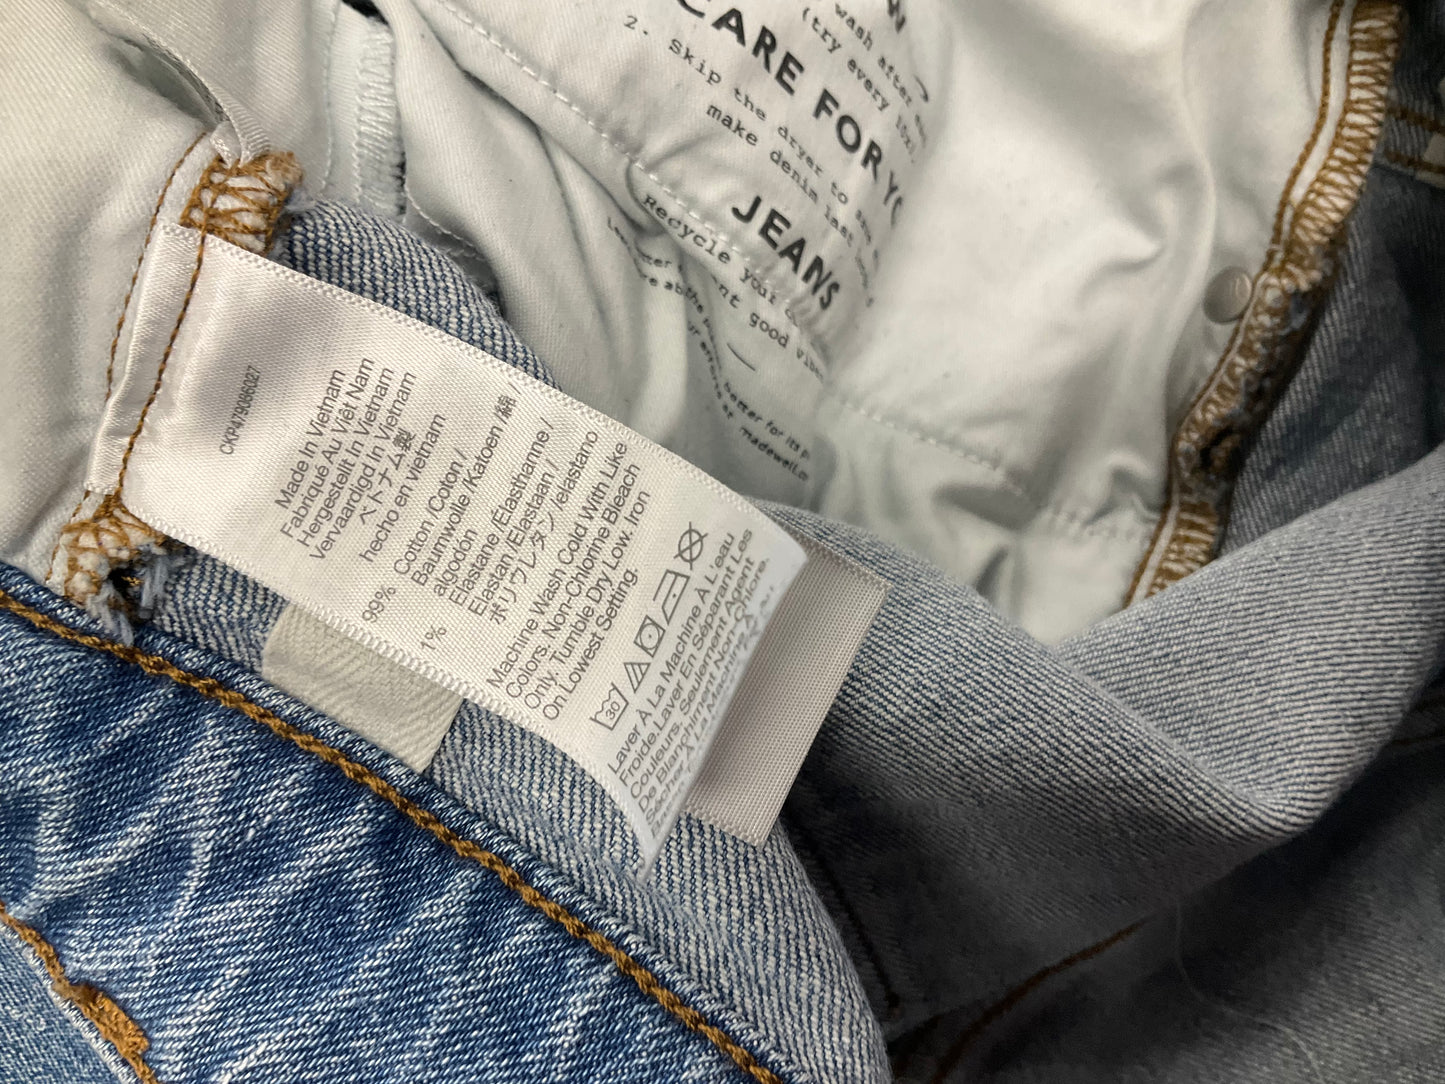 Jeans Straight By Madewell  Size: 20